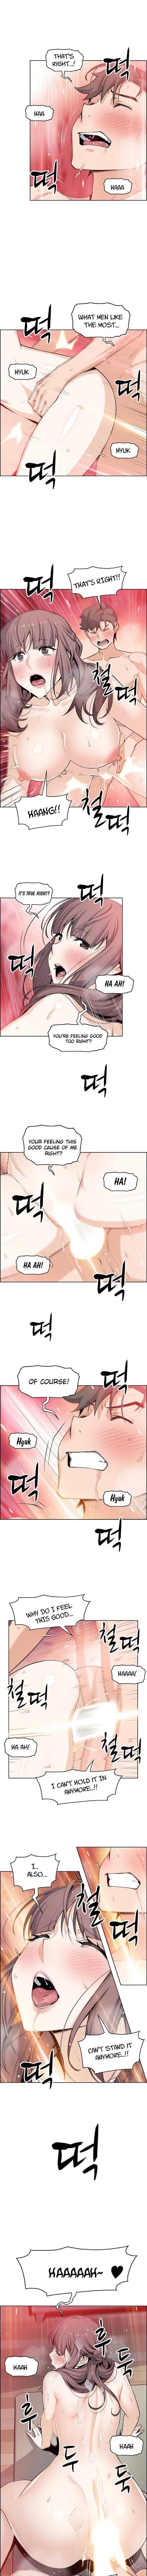 Housekeeper [Neck Pillow, Paper] Ch.49/49 [English] [Manhwa PDF] Completed 247